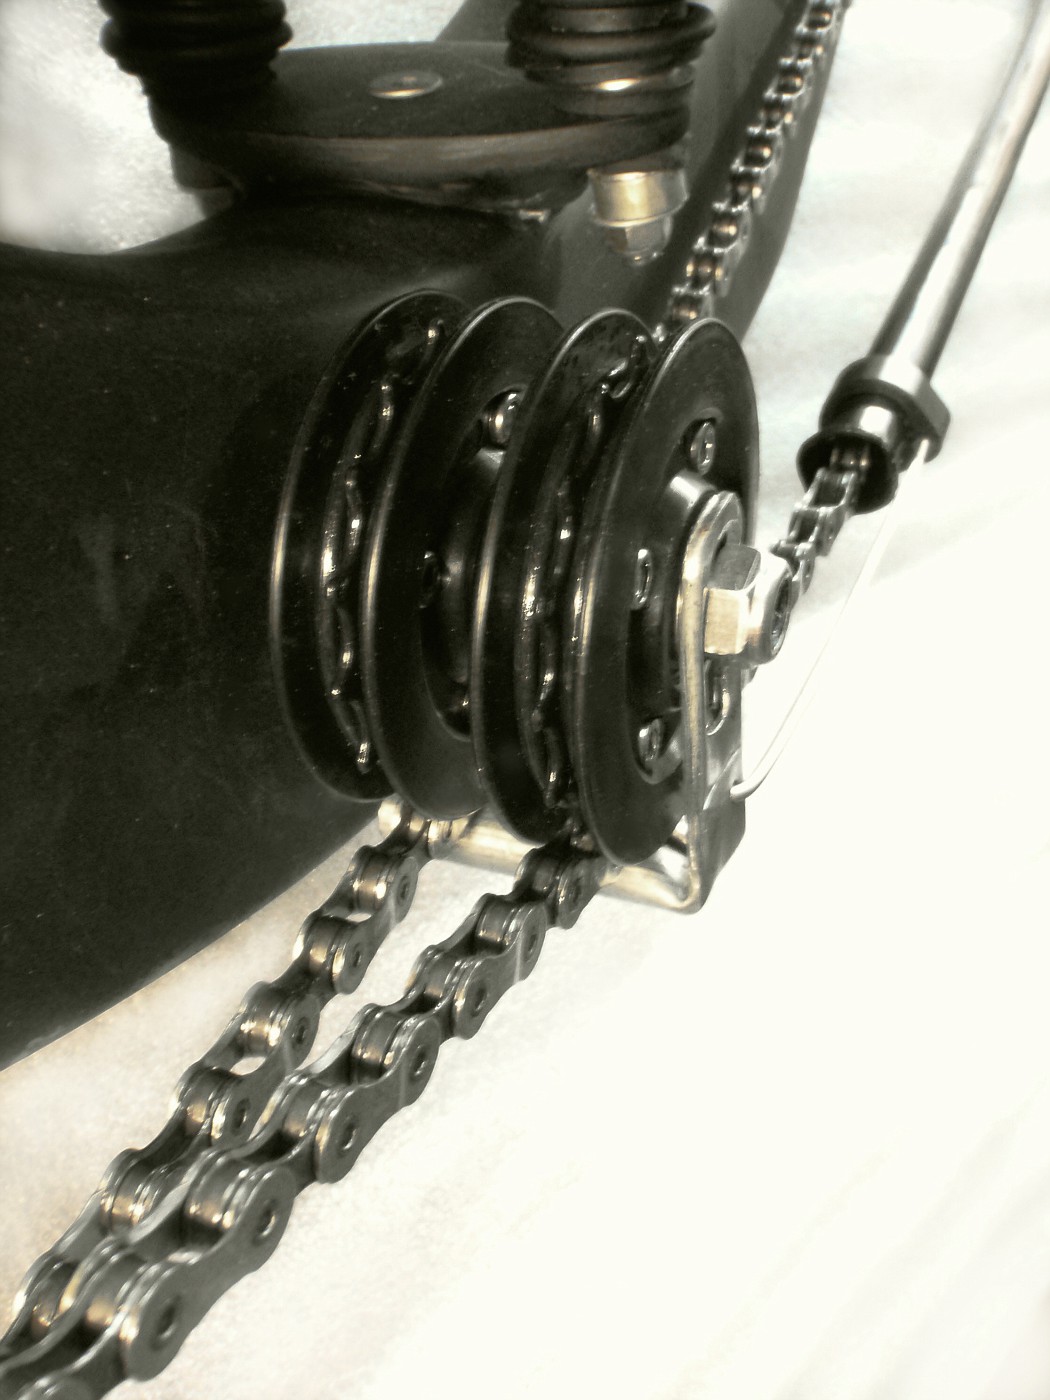 Assembled chain pulleys with bash guard